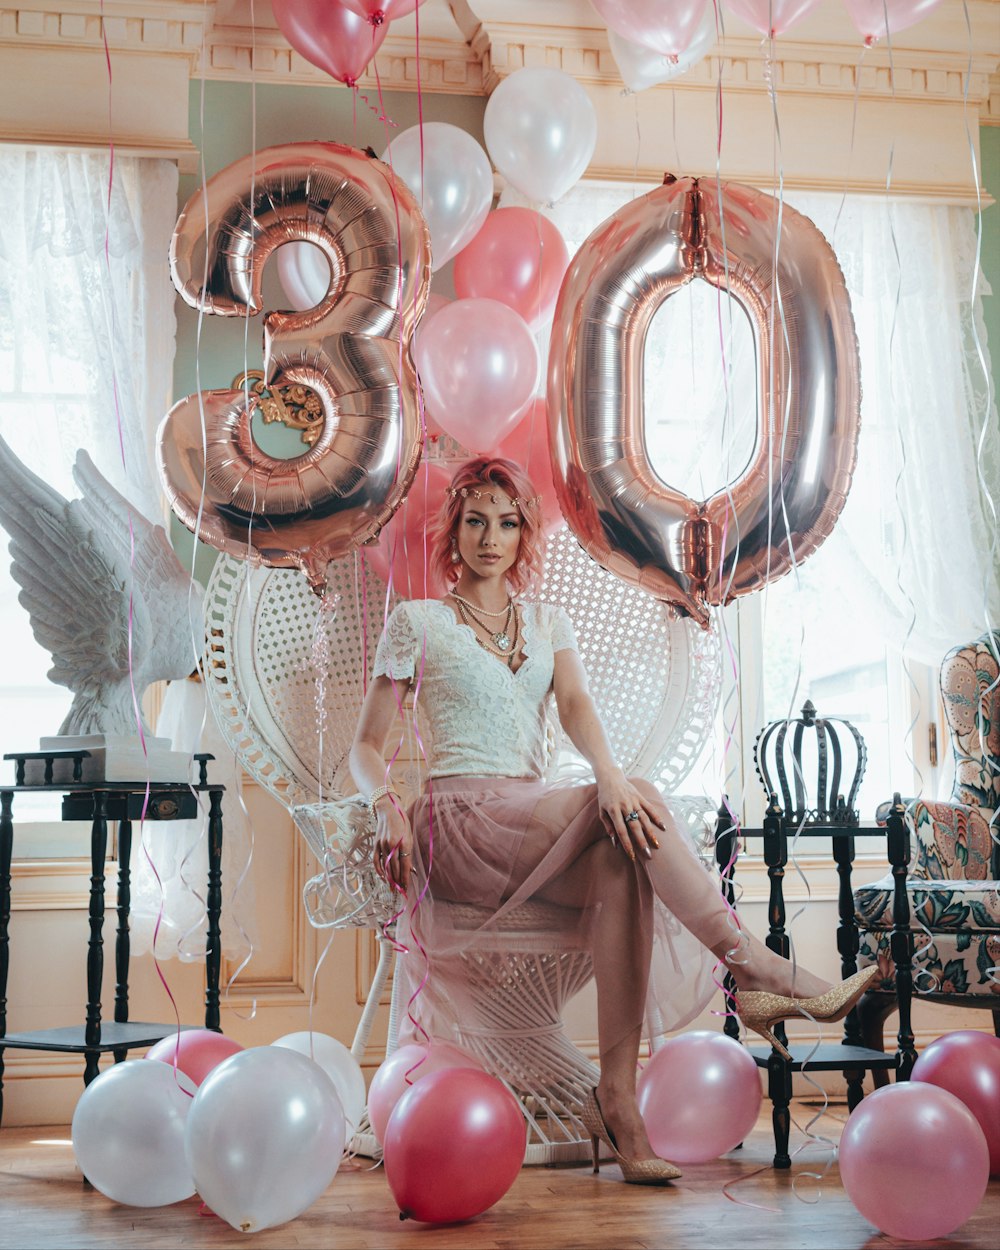 a woman sitting on a chair surrounded by balloons